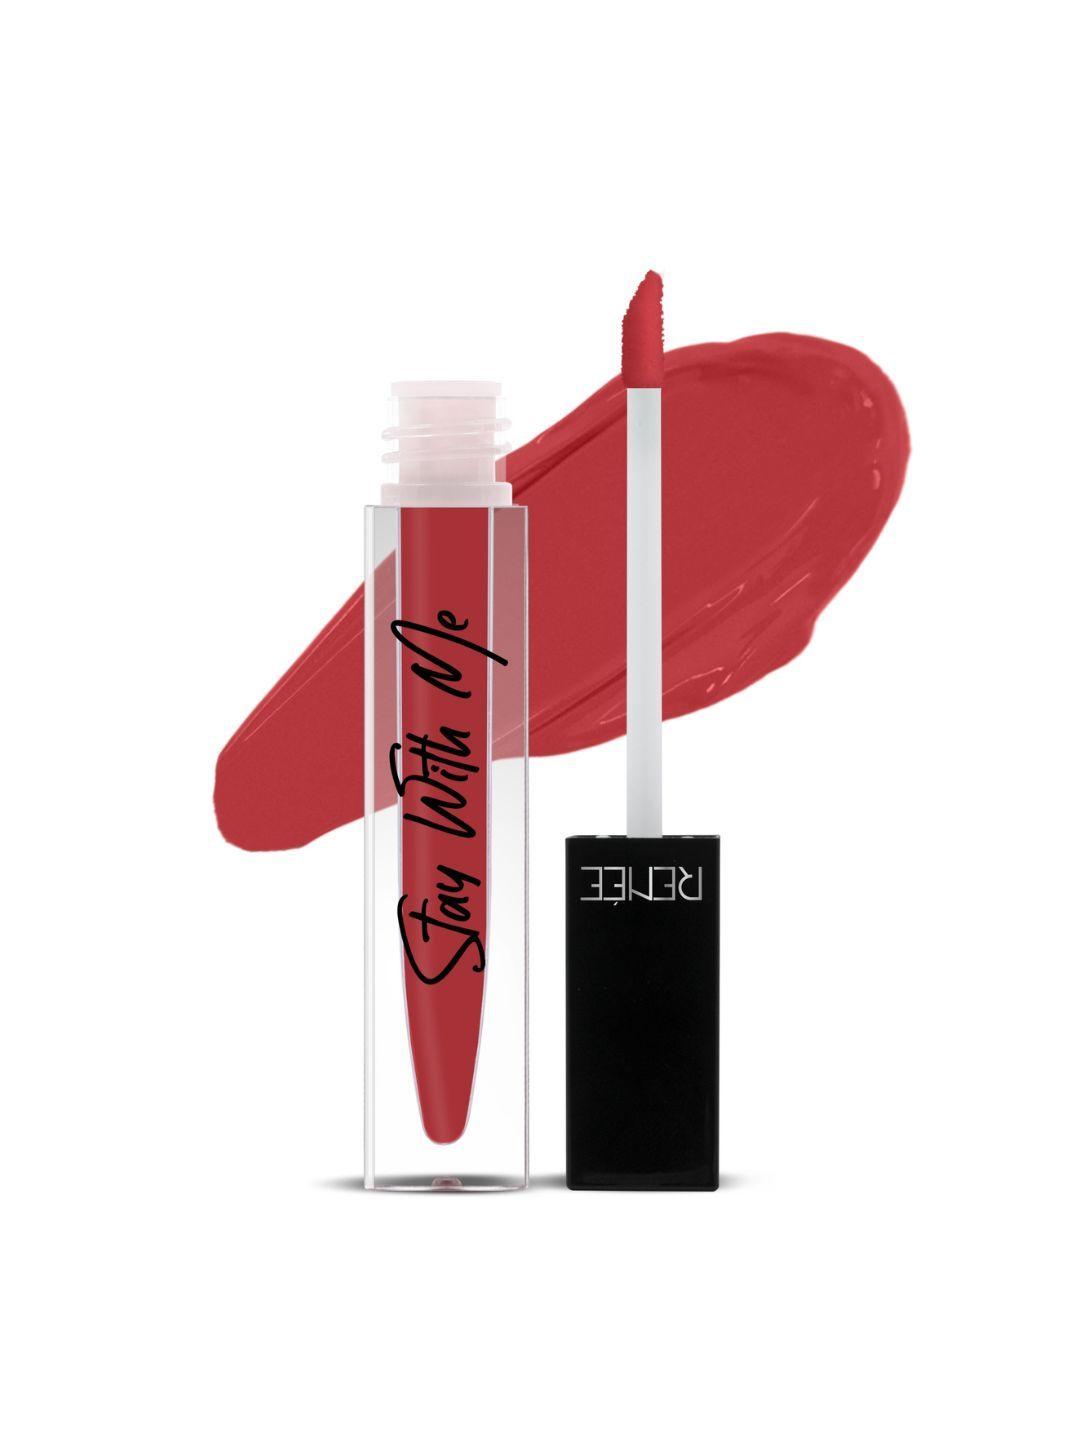 renee stay with me matte lip color - hunger for berry 5ml